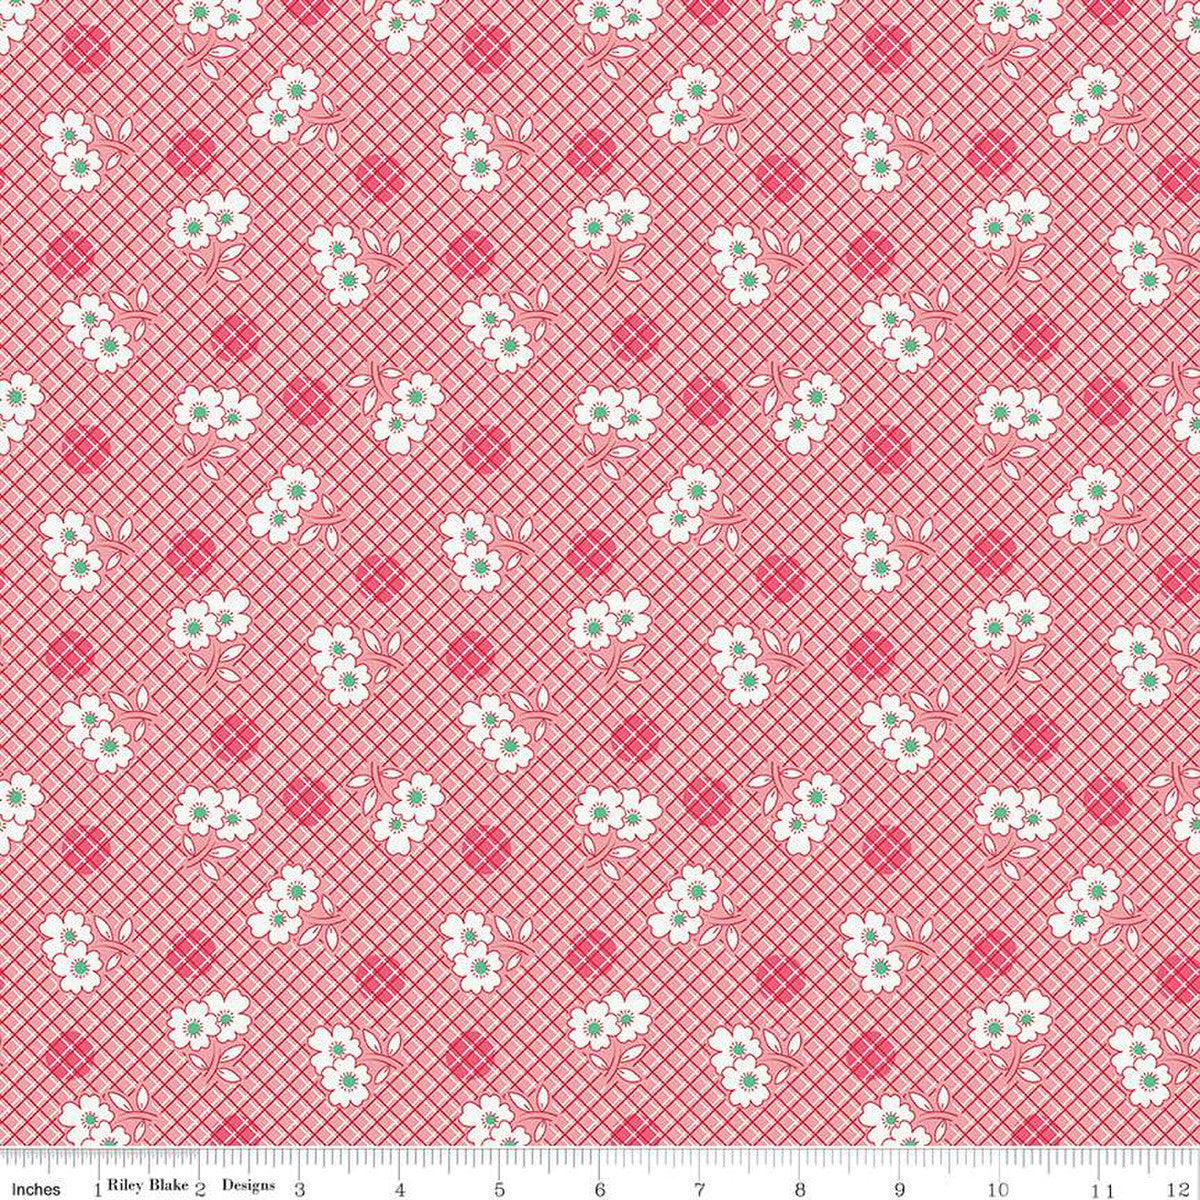 Fabric, Basin Feedsacks DAISY PINK by Stacy West (by the yard)